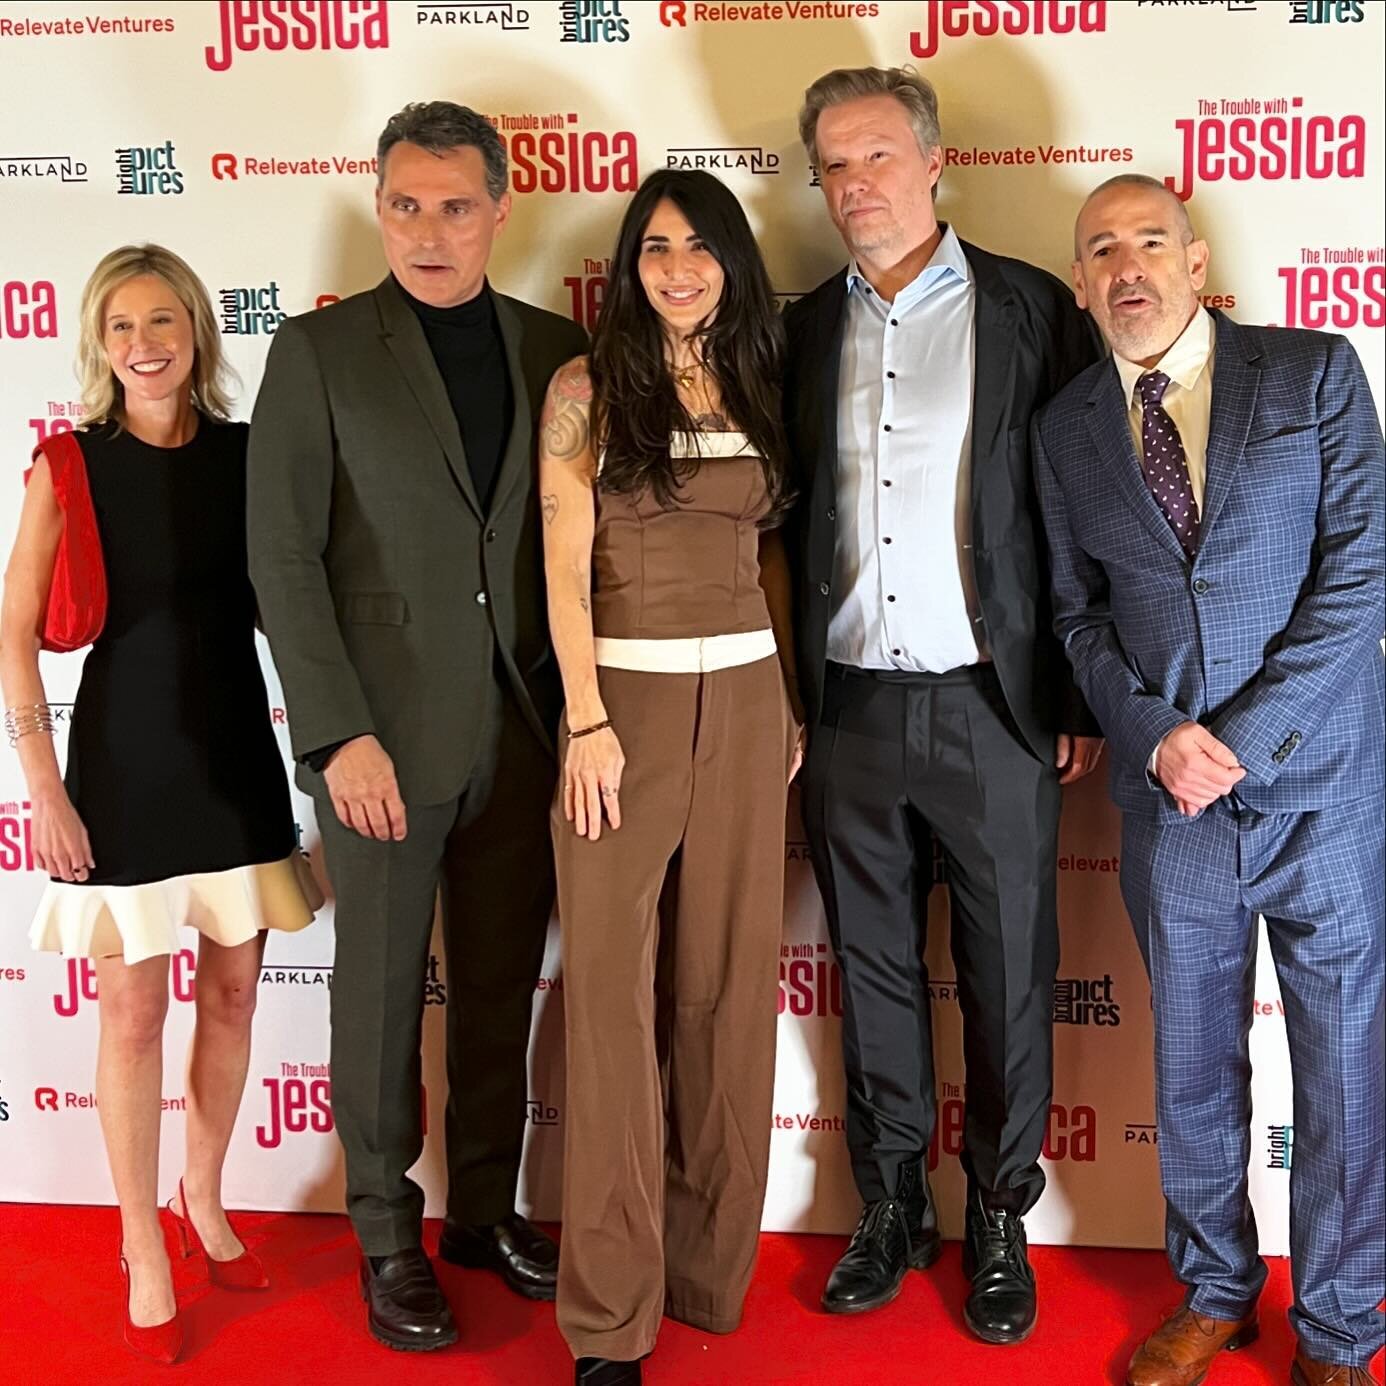 A little step and go @ the premiere of The Trouble with Jessica With @fredriksewell @mattwinndirectordnote @sarahsulick #thetroublewithjessica #parklandpictures